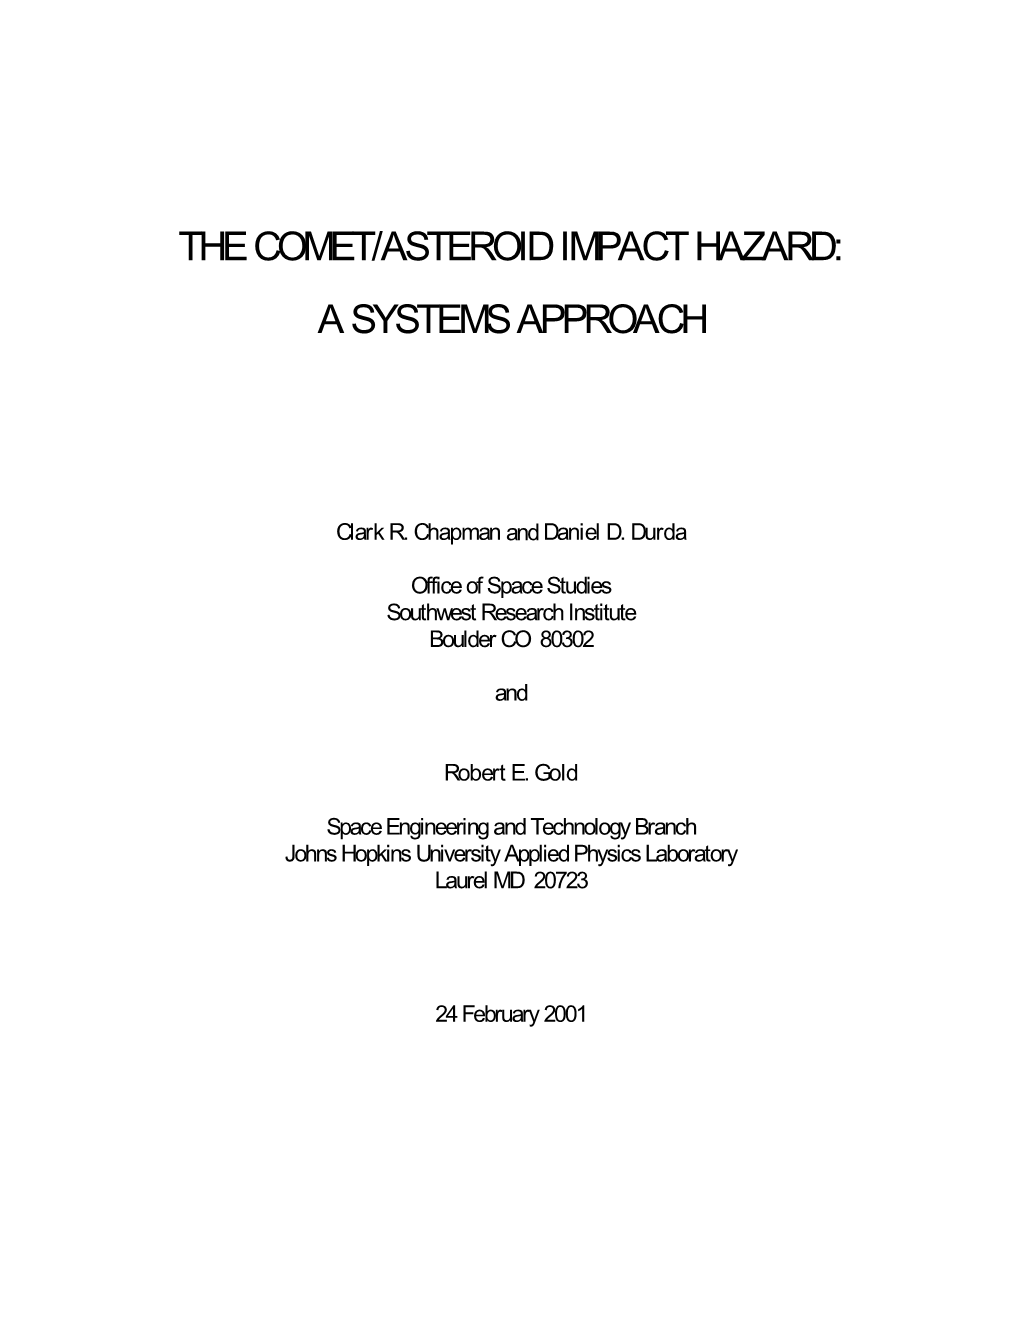 The Comet/Asteroid Impact Hazard: a Systems Approach